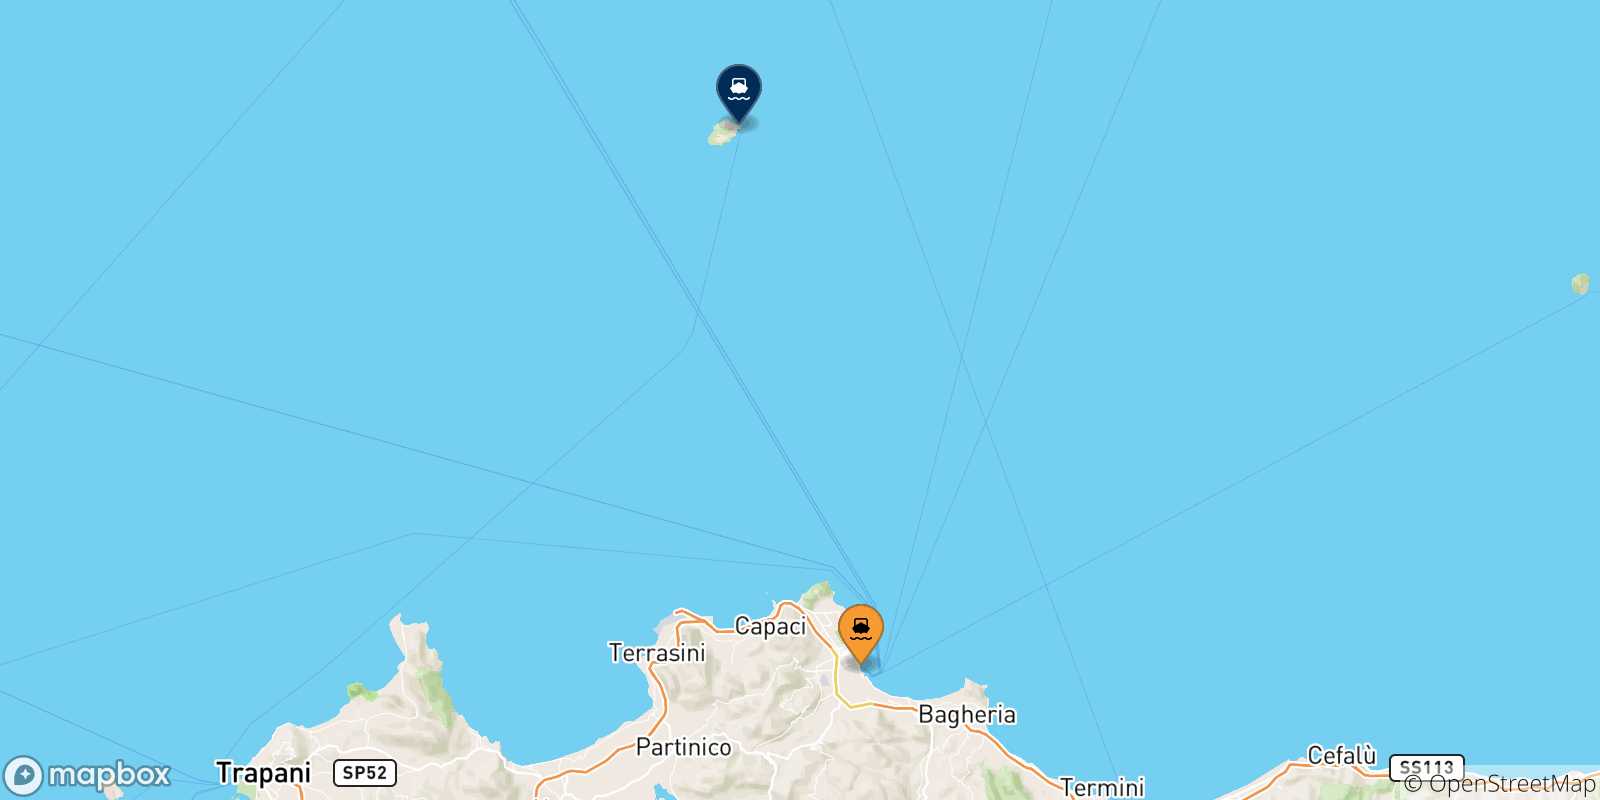 Map of the possible routes between Italy and Ustica Island